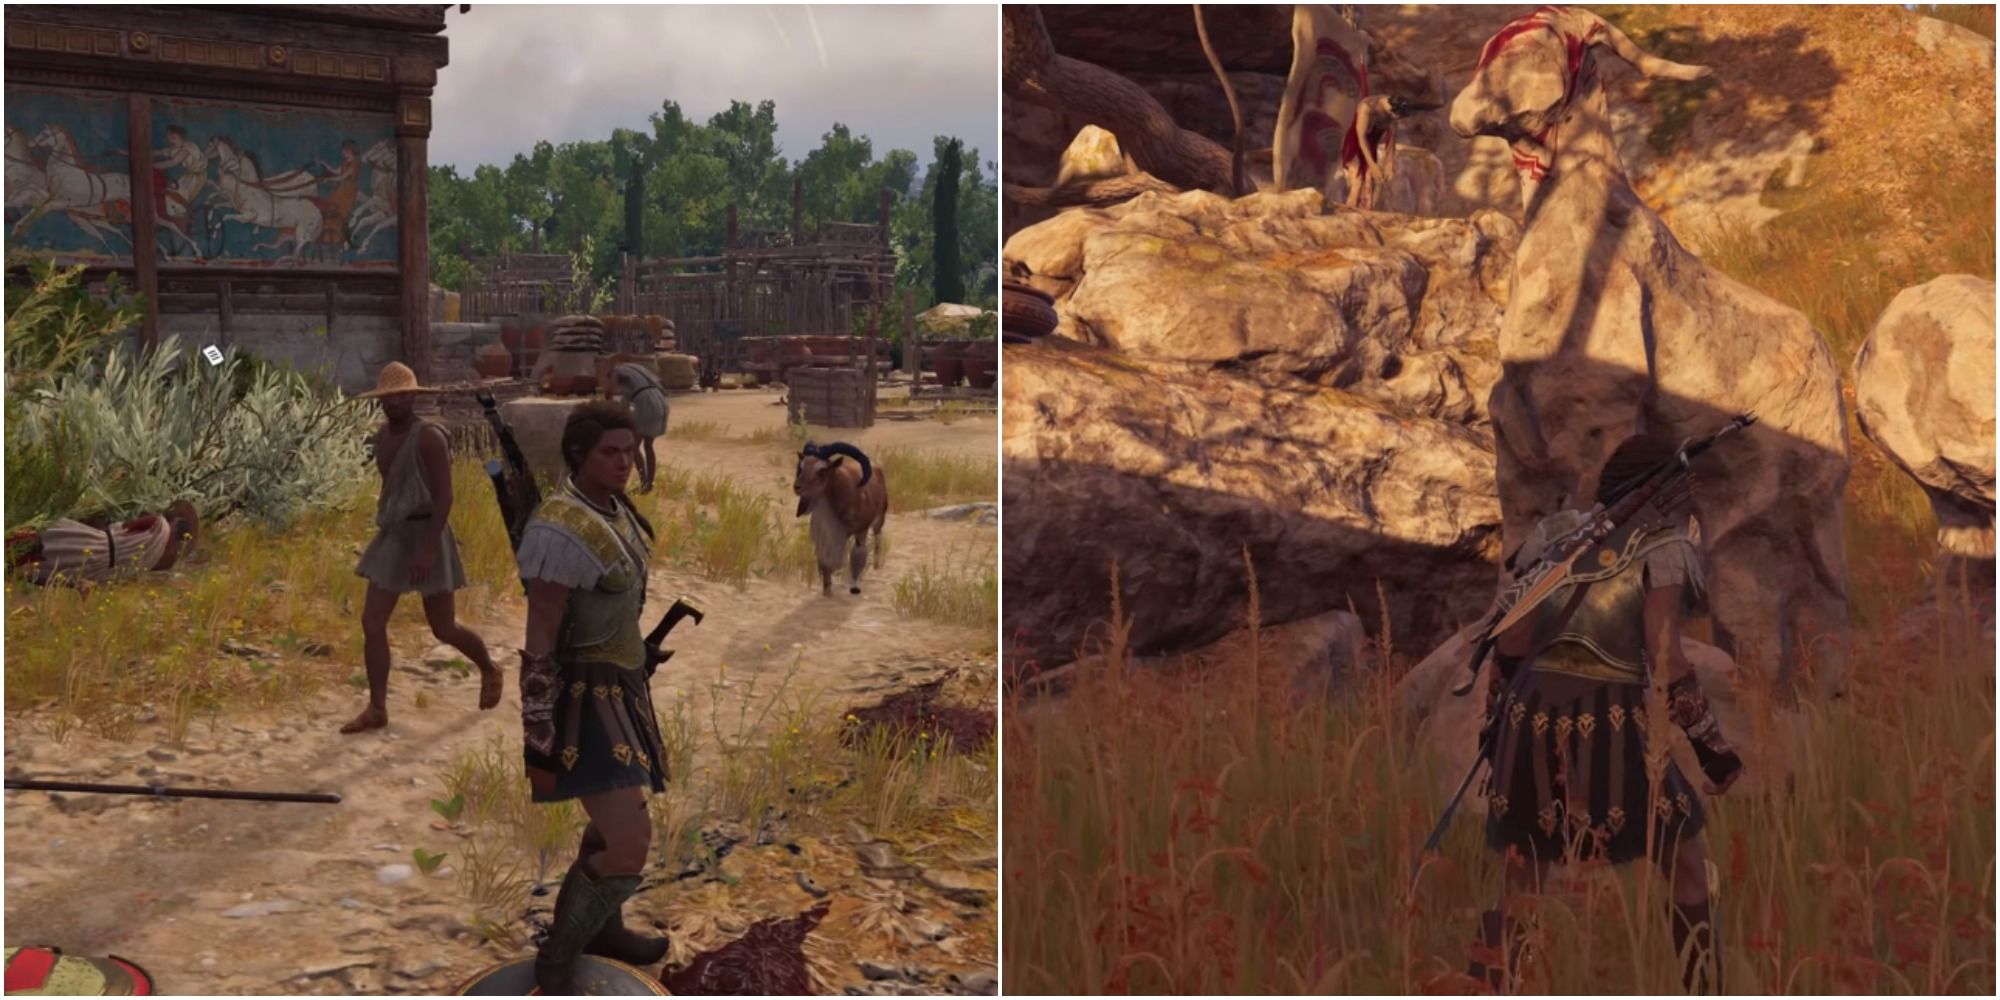 Image 1 shows the main character in Camp Dekelia. Image 2 shows the main character facing a statue of a goat near a cave.